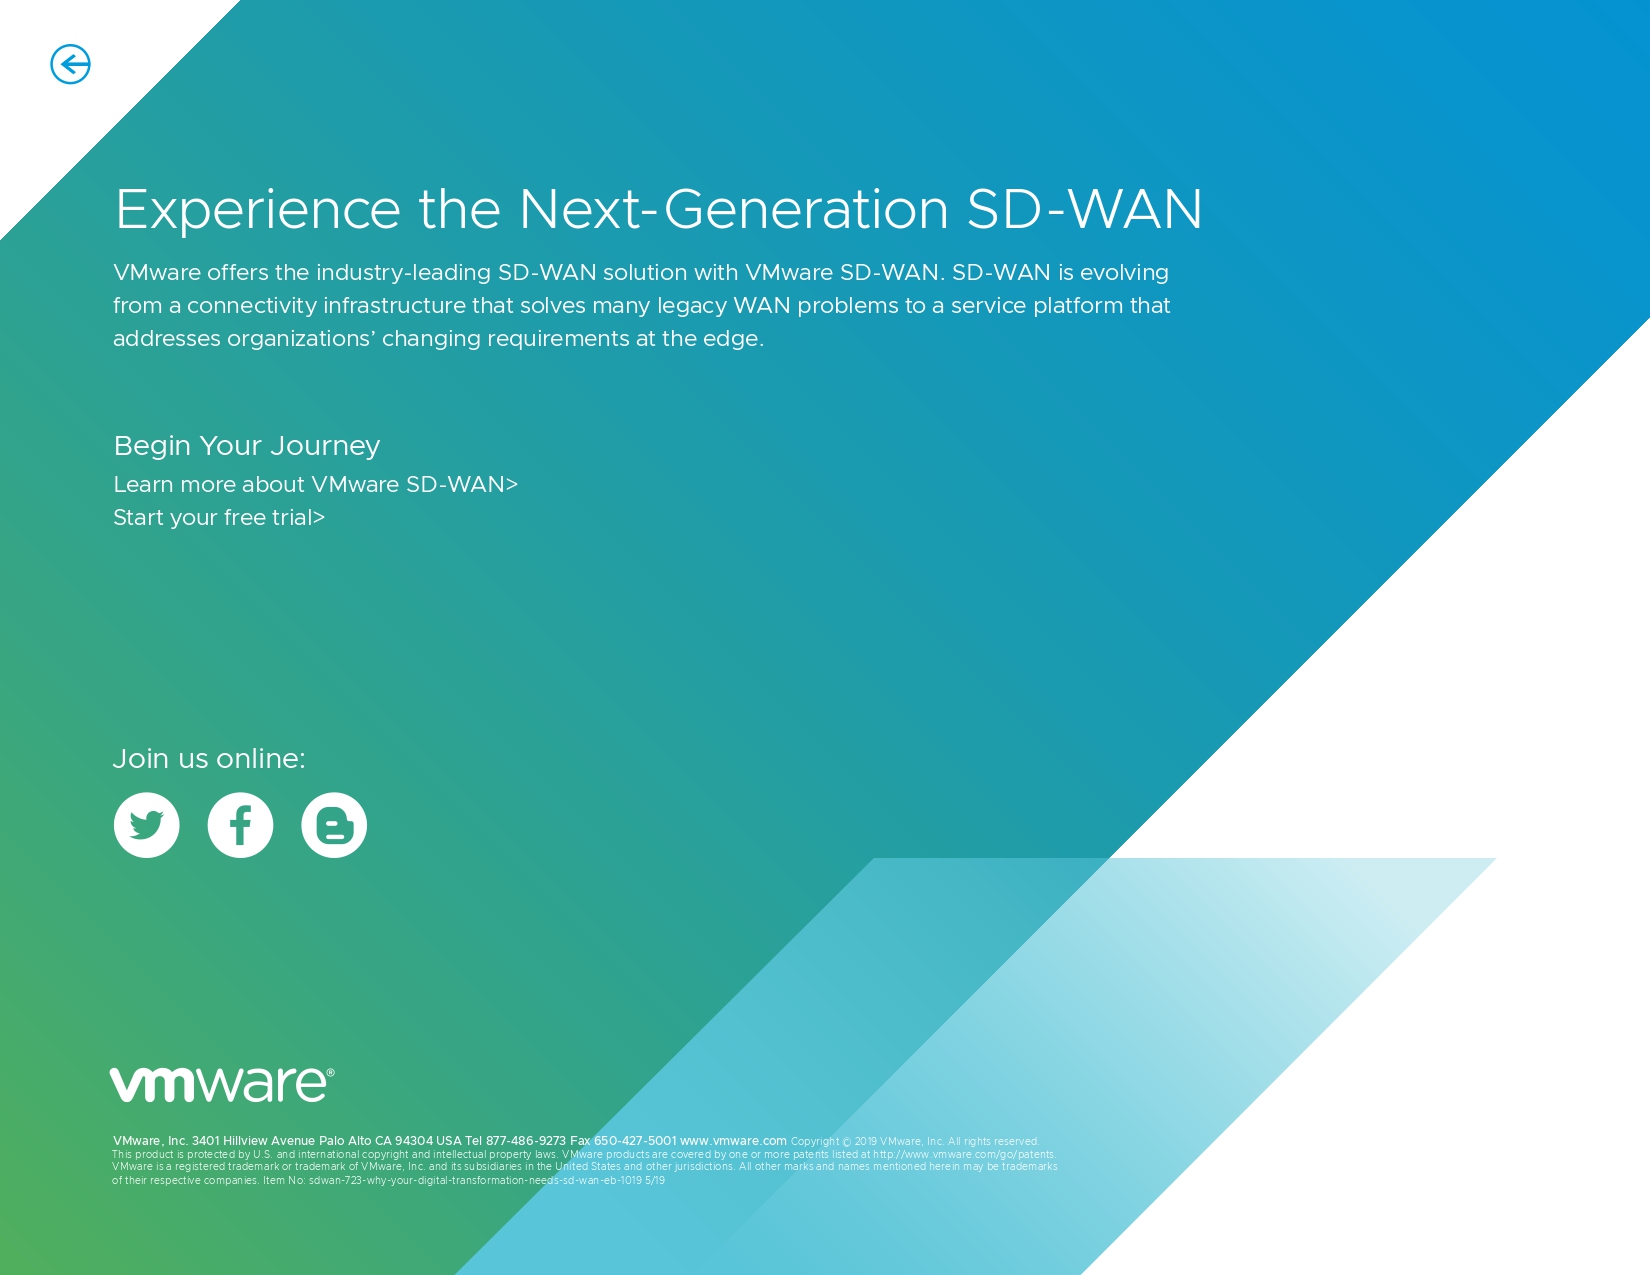 +211431_NEW_Co-branded_CBTS_Why_Your_Enterprise_Digital_Transformation_Needs_SD-WAN-e-book_page-0025